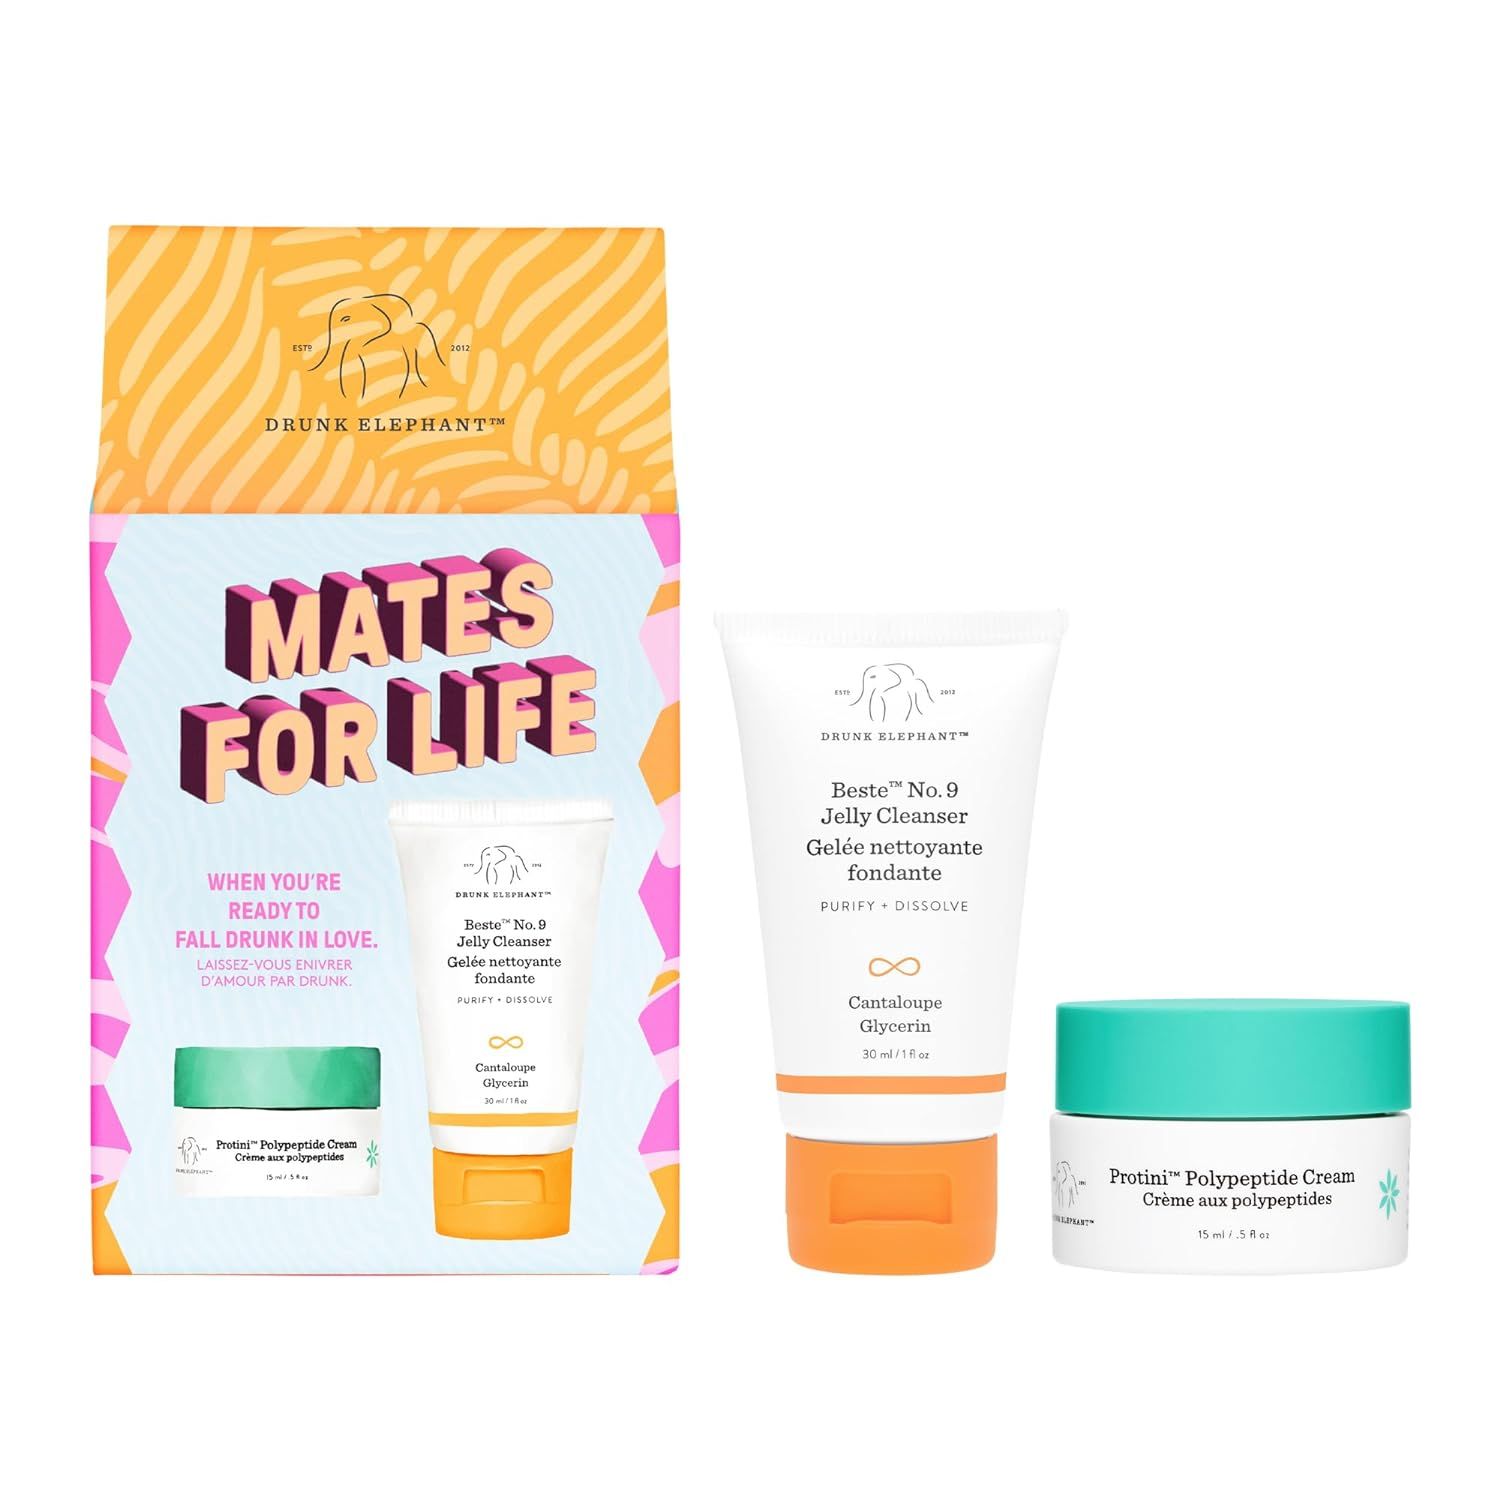 Drunk Elephant Mates for Life Kit: cleanses and moisturizes skin - Includes Beste No. 9 Jelly Cle... | Amazon (US)